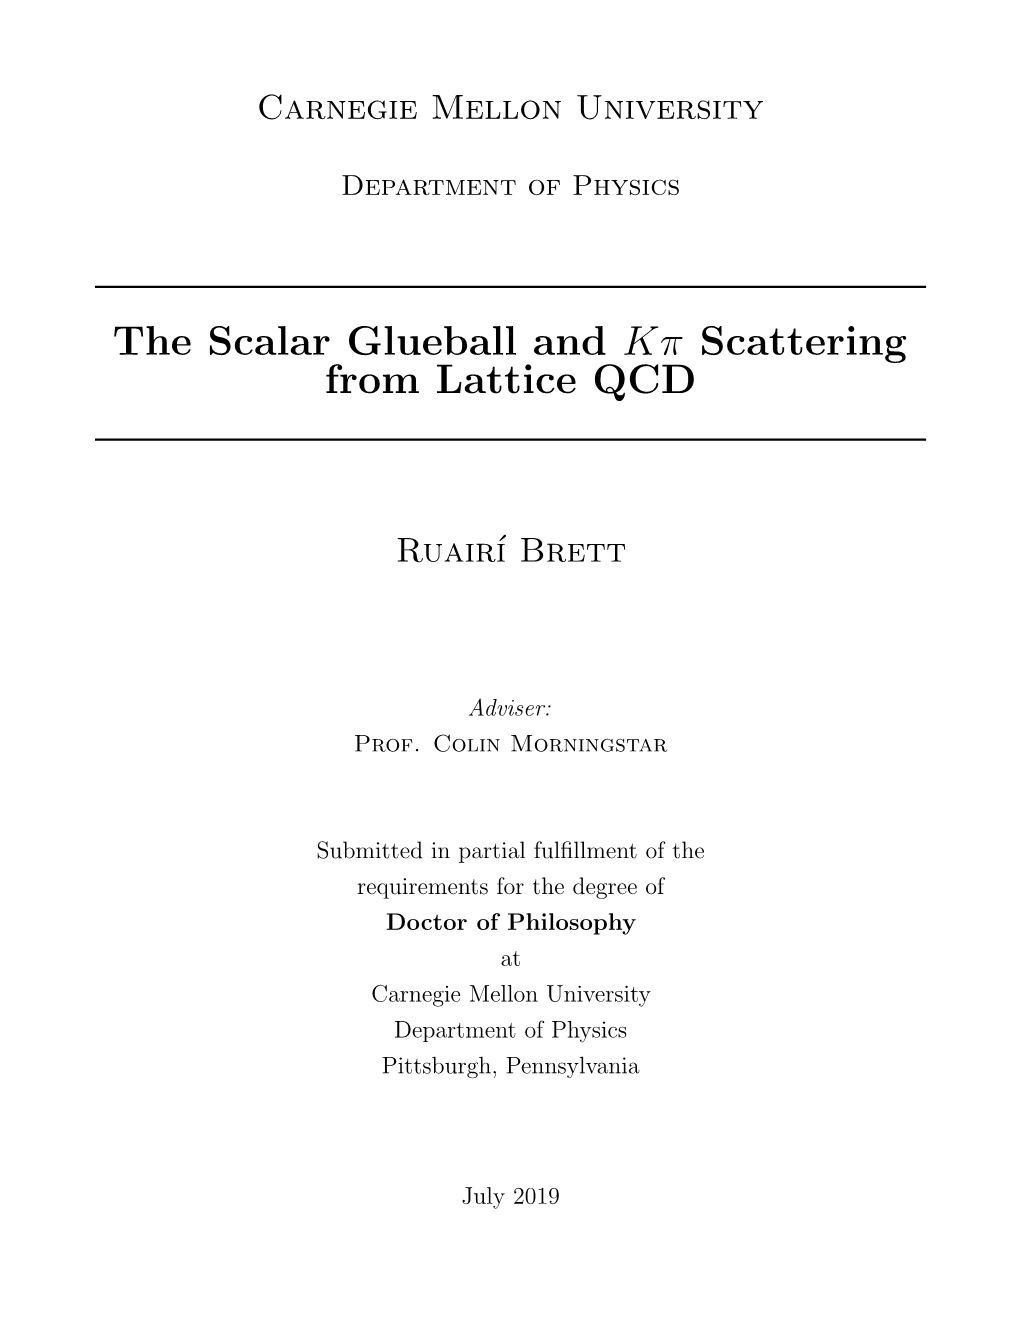 The Scalar Glueball and Kπ Scattering from Lattice QCD